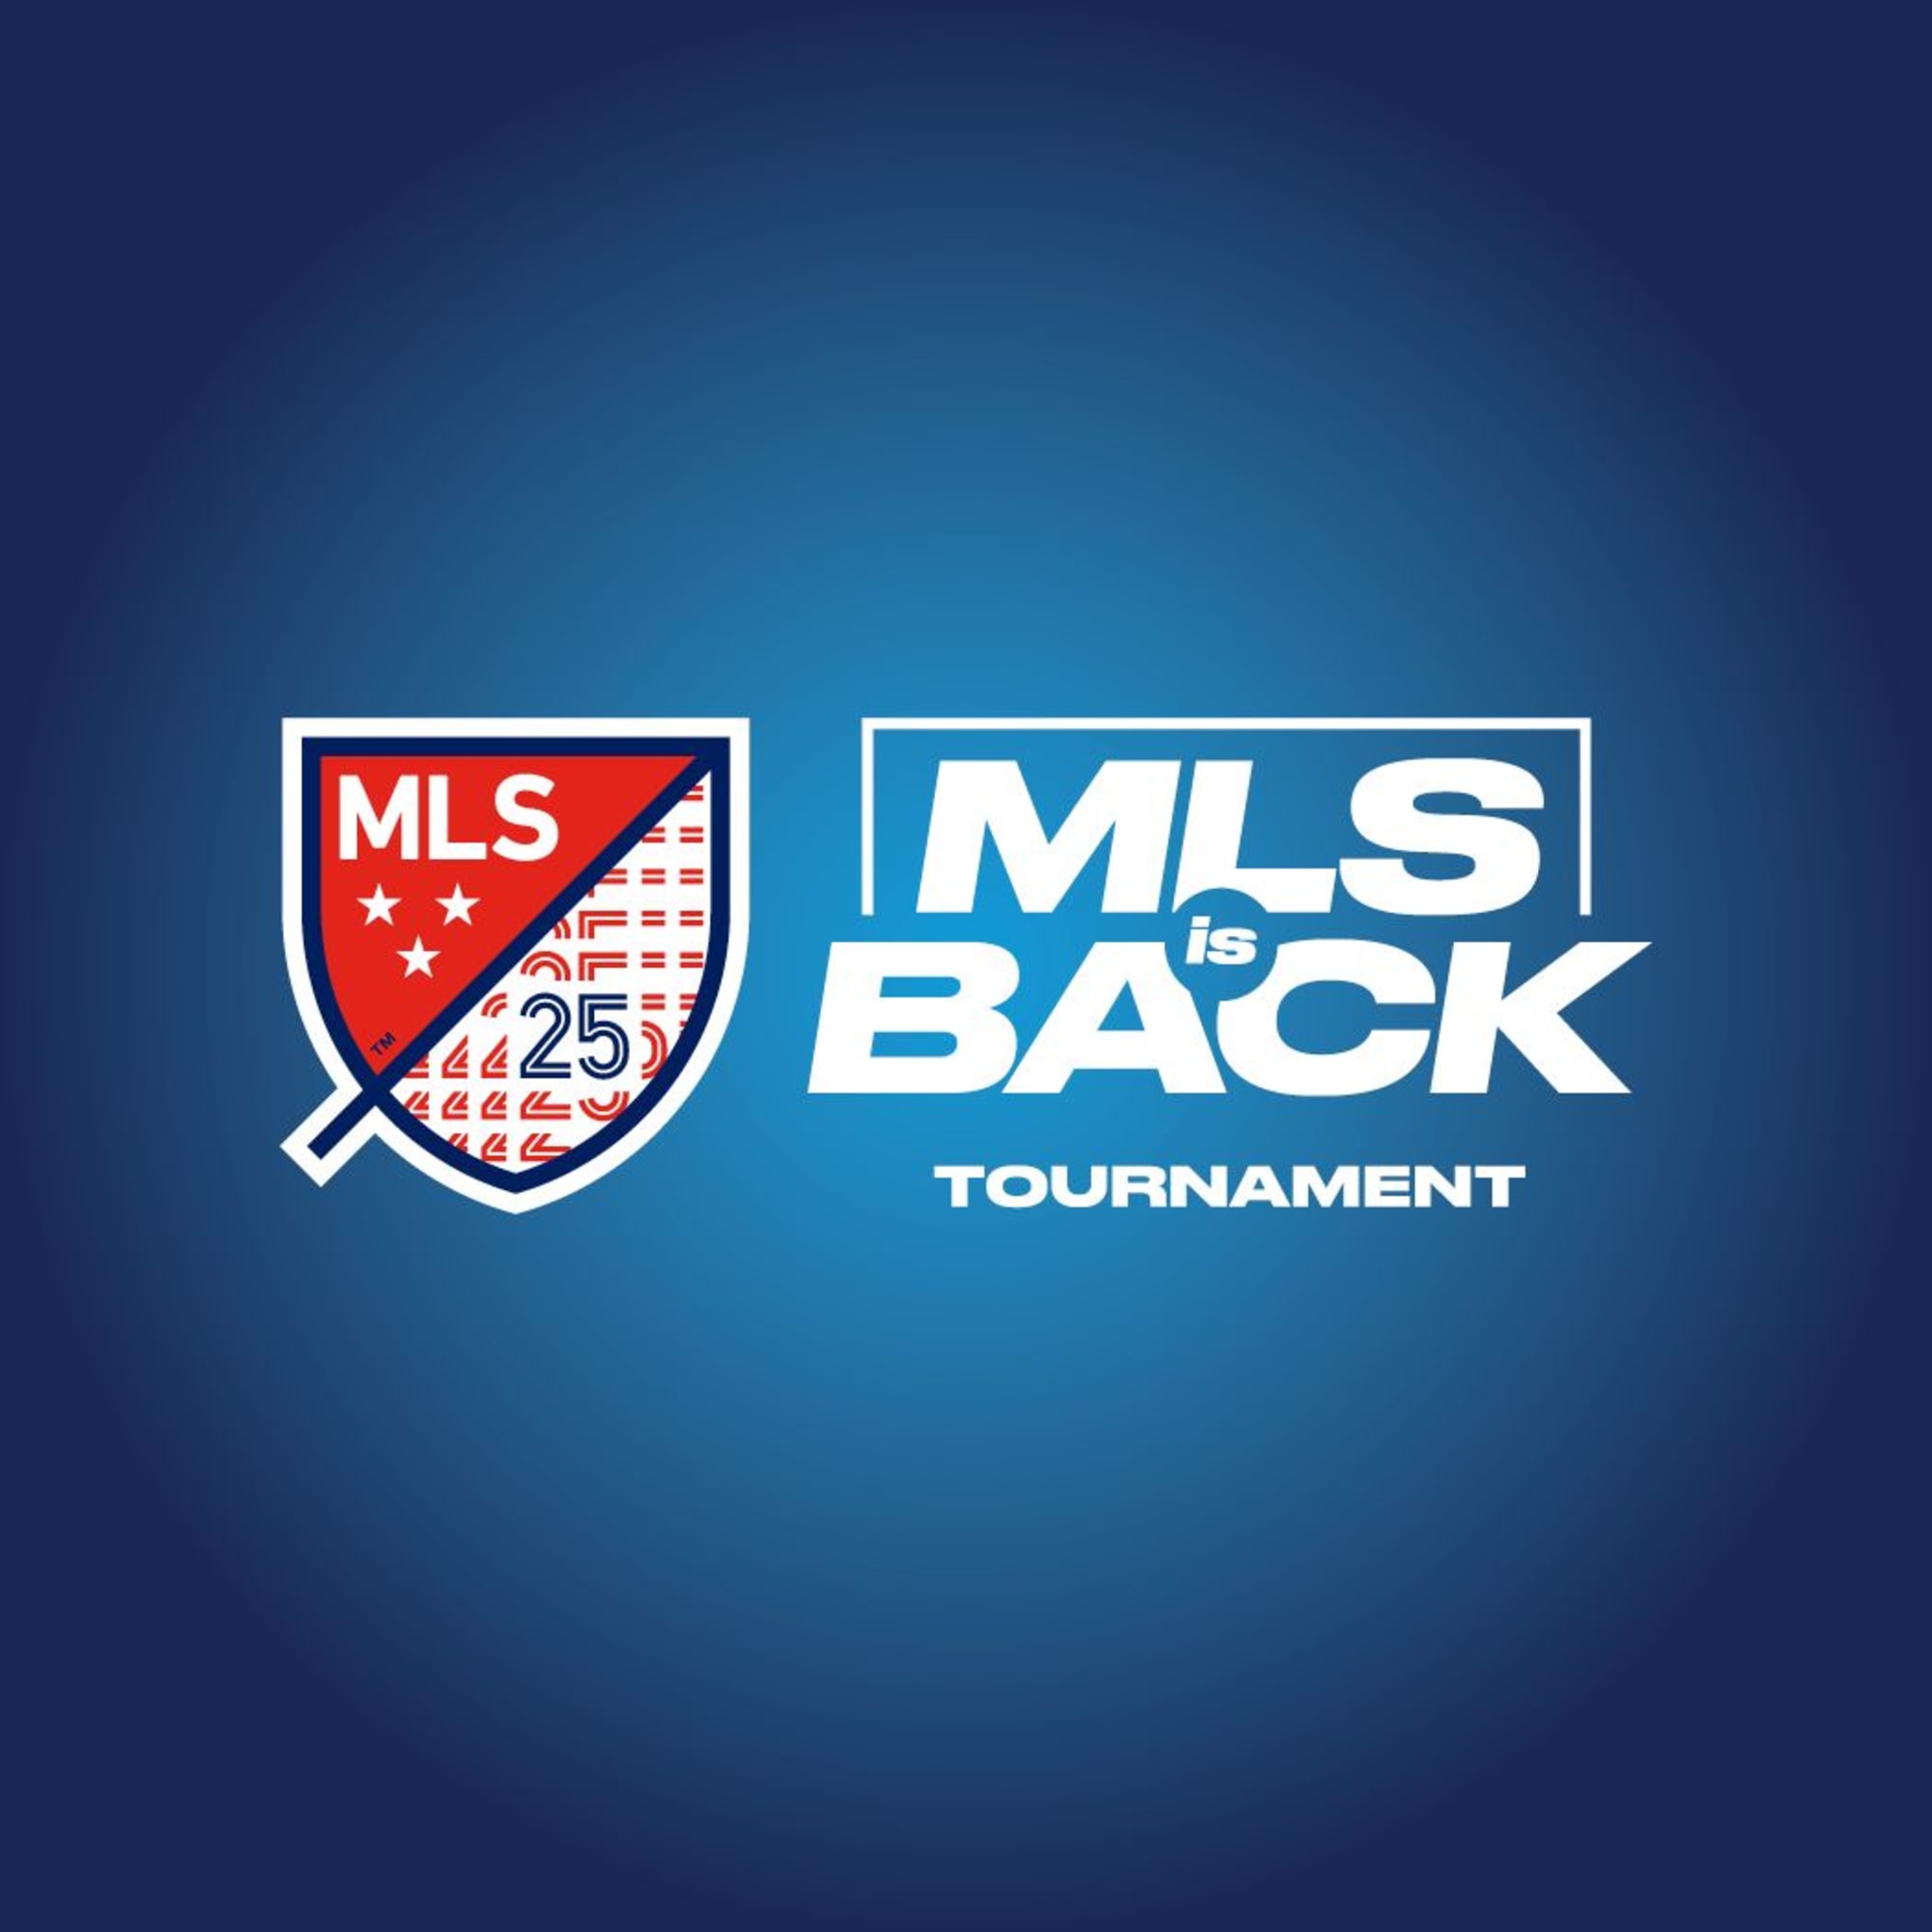 Everything you need to know about the MLS is Back Tournament